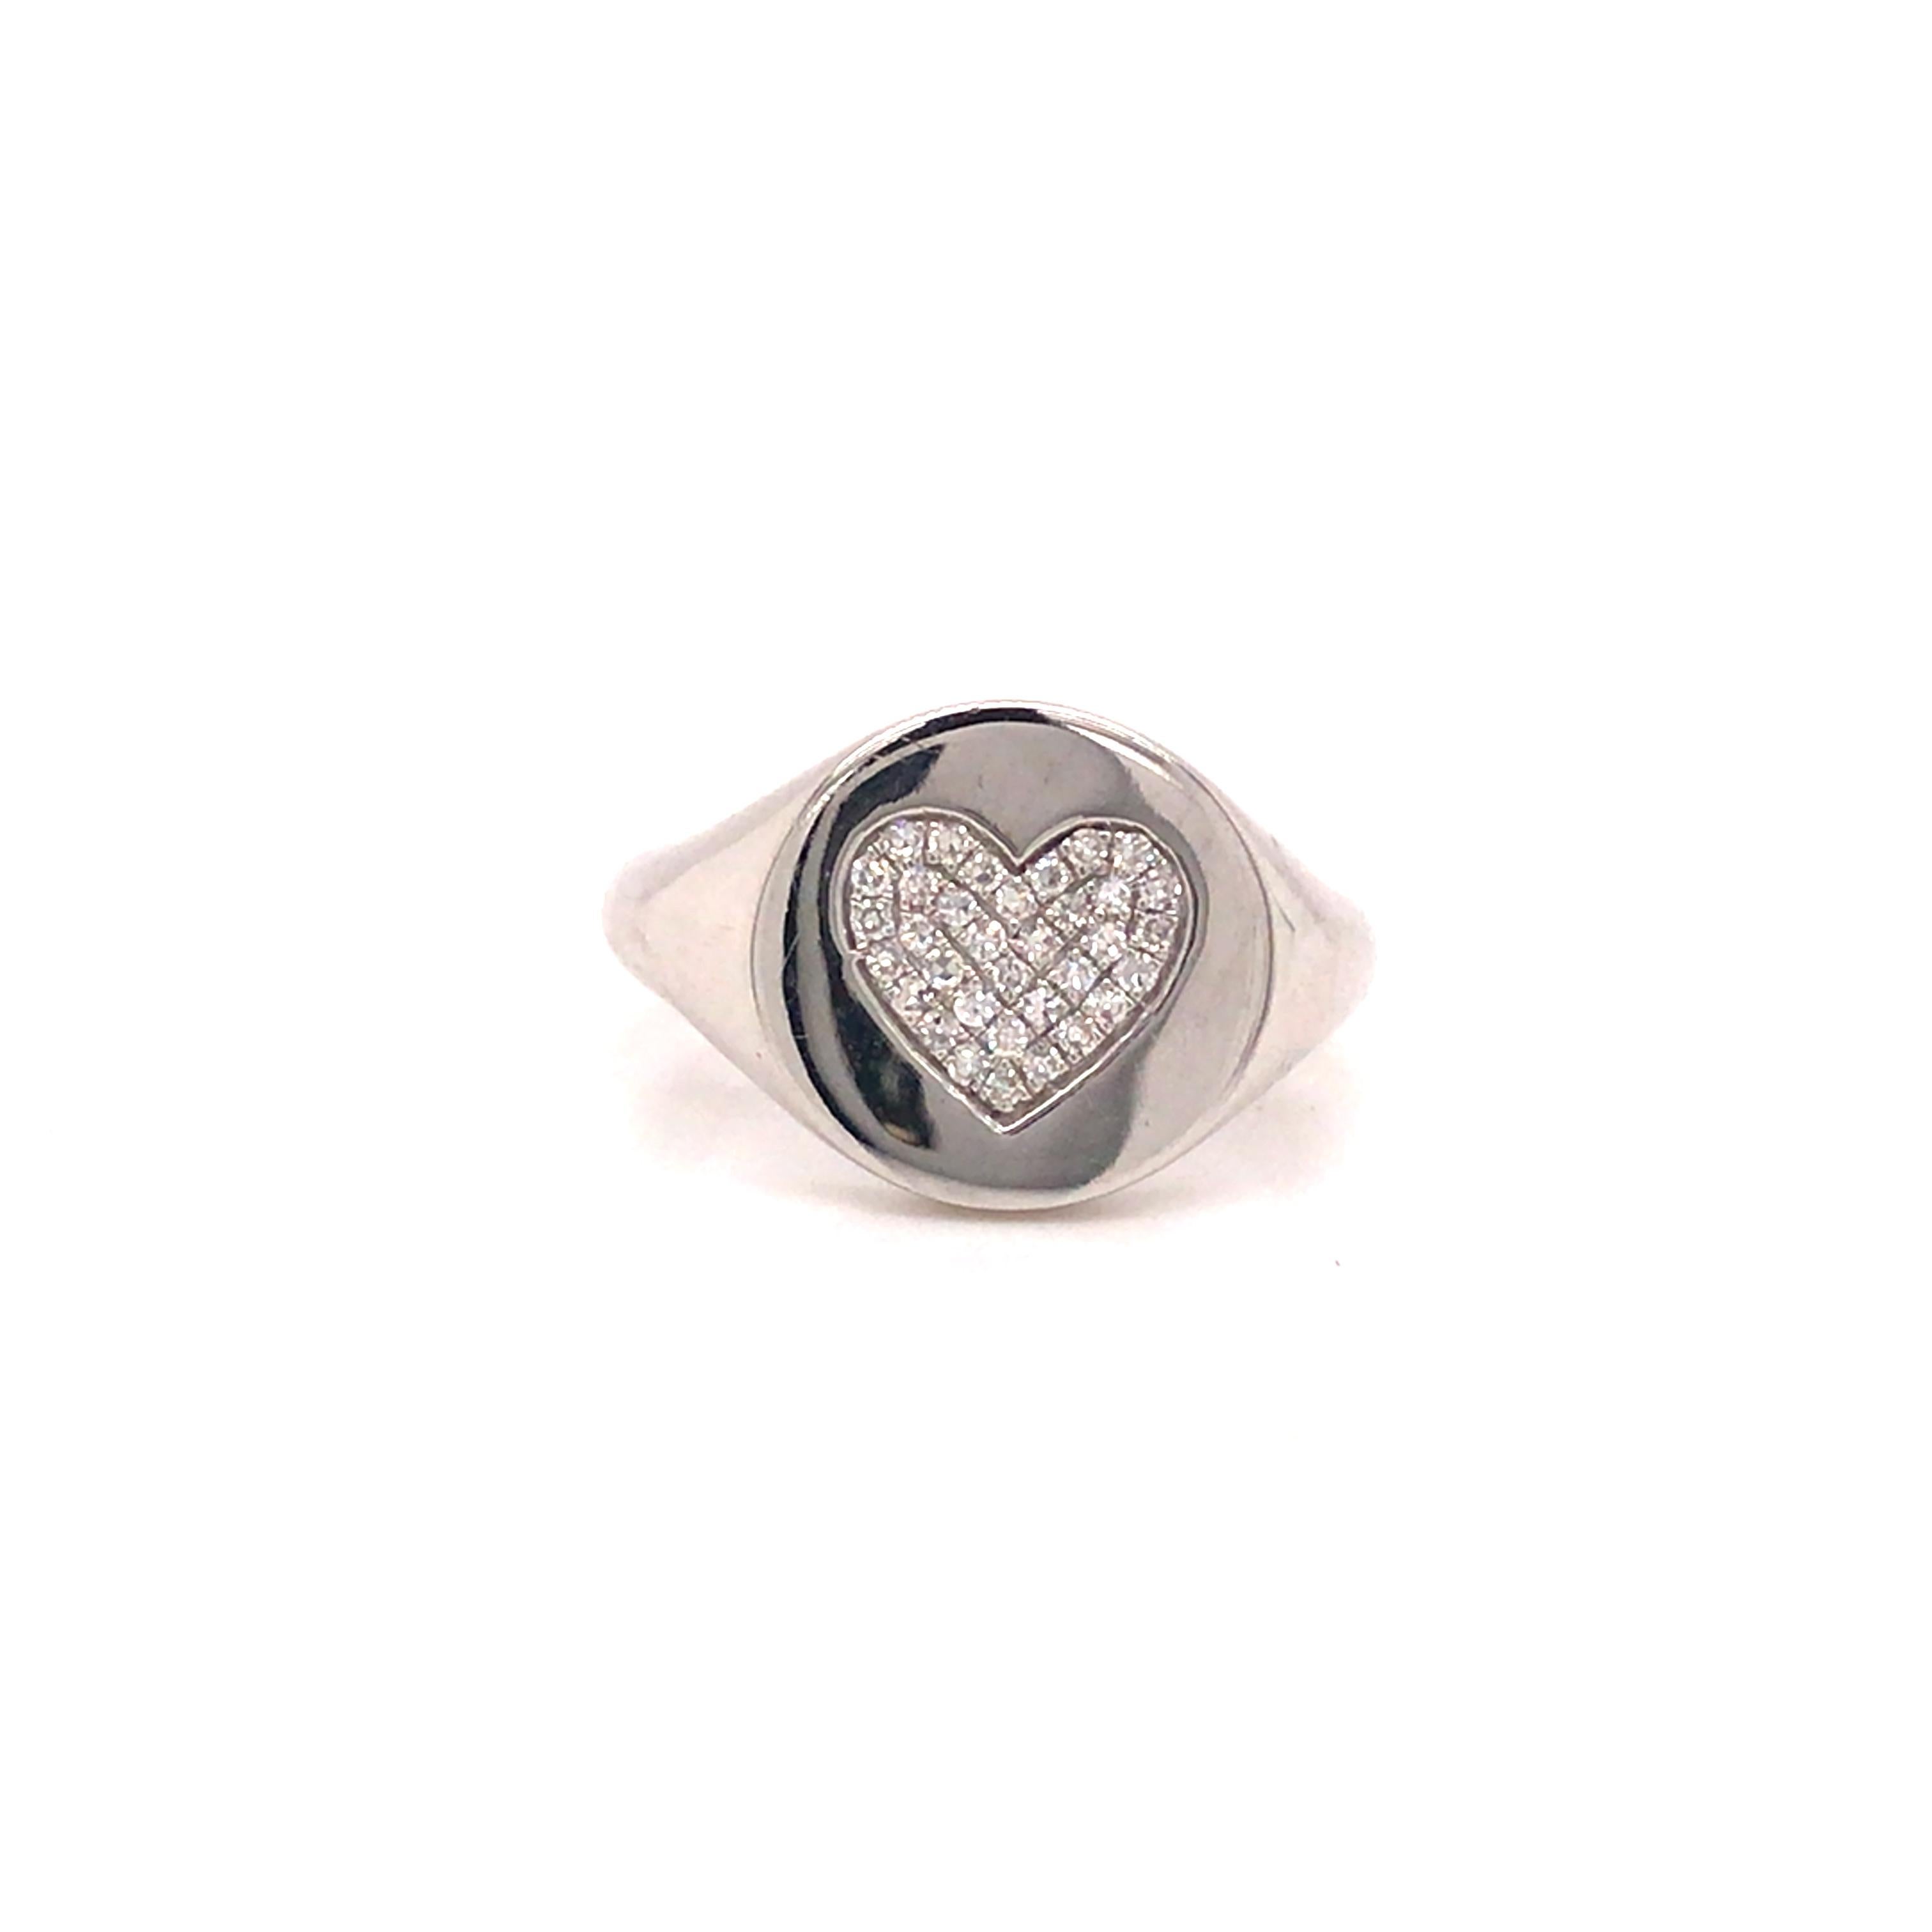 Diamond Pave Heart Signet Pinky Ring in 14K White Gold.  (34) Round Brilliant Cut Diamonds weighing 0.11 carat total weight, G-H in color and VS-SI in clarity are expertly set.  The Ring Top measures 1/2 inch in diameter. Ring size 3 3/4. 3.26 grams.